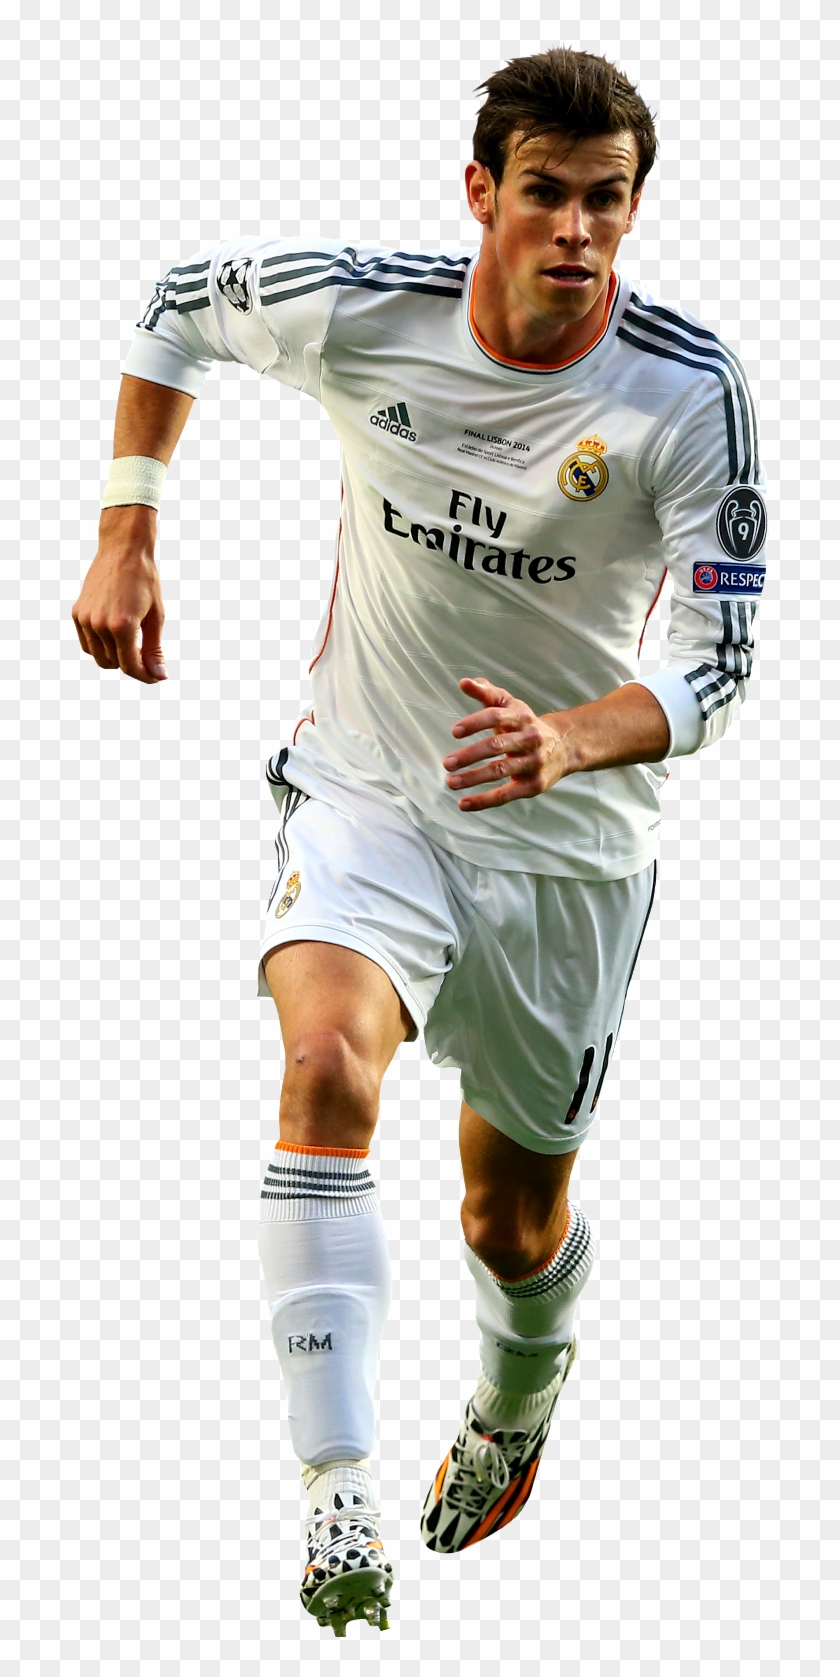 Gareth Bale Of Real Madrid In The 2014 Champions League Real Madrid Bale Png Transparent Png 699x1597 709420 Pngfind